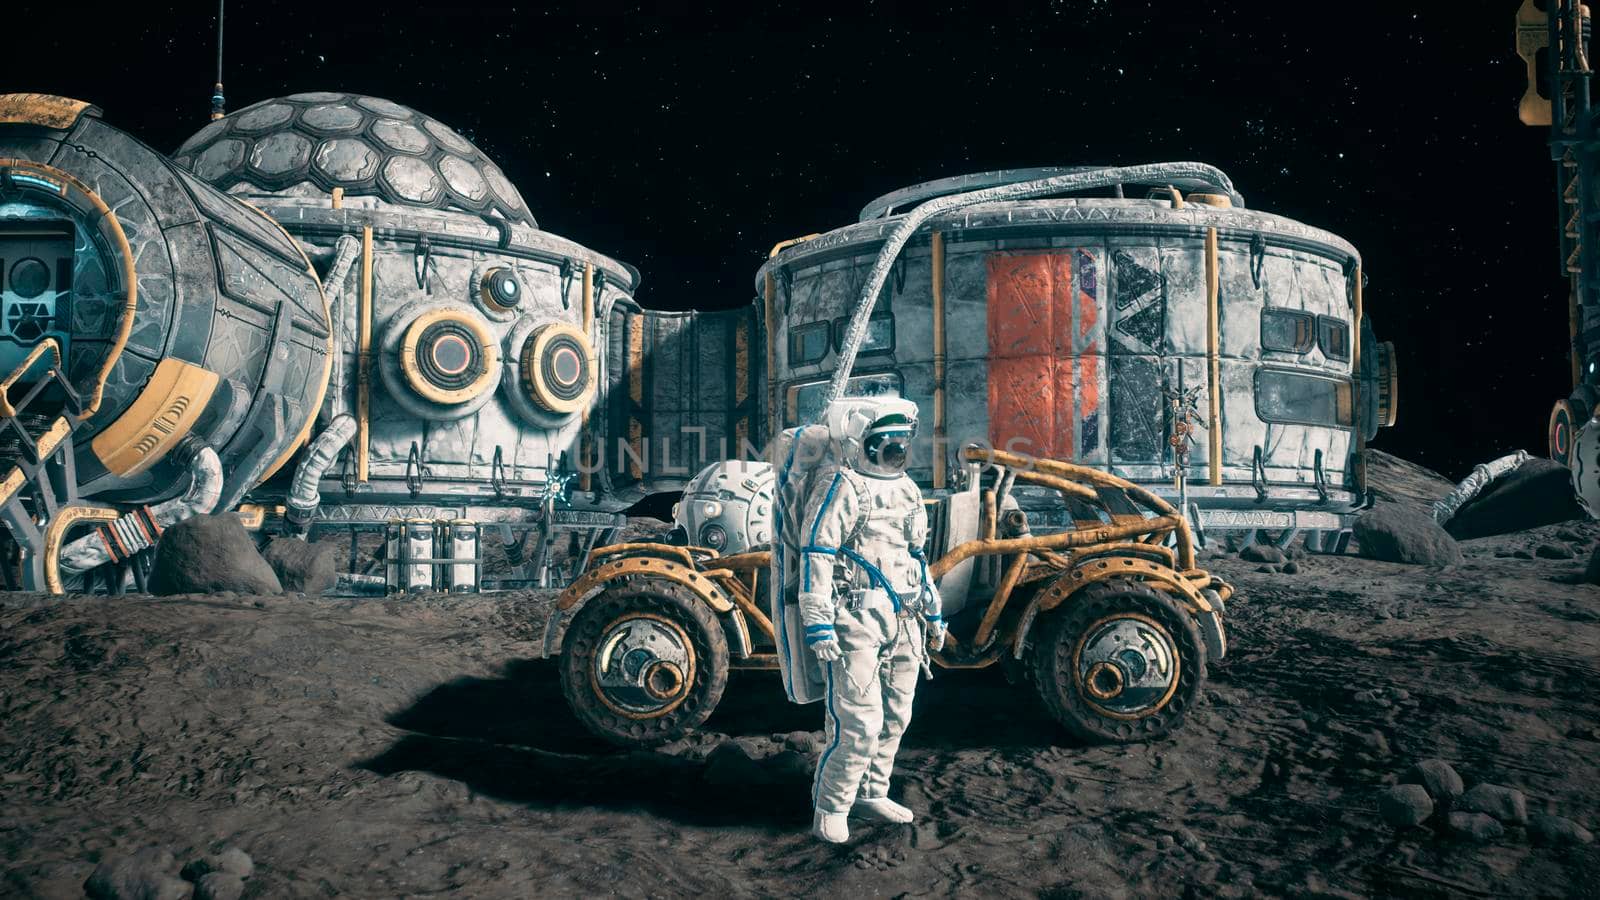 An astronaut stands beside his lunar rover at the space moon base. View of the future lunar colony.